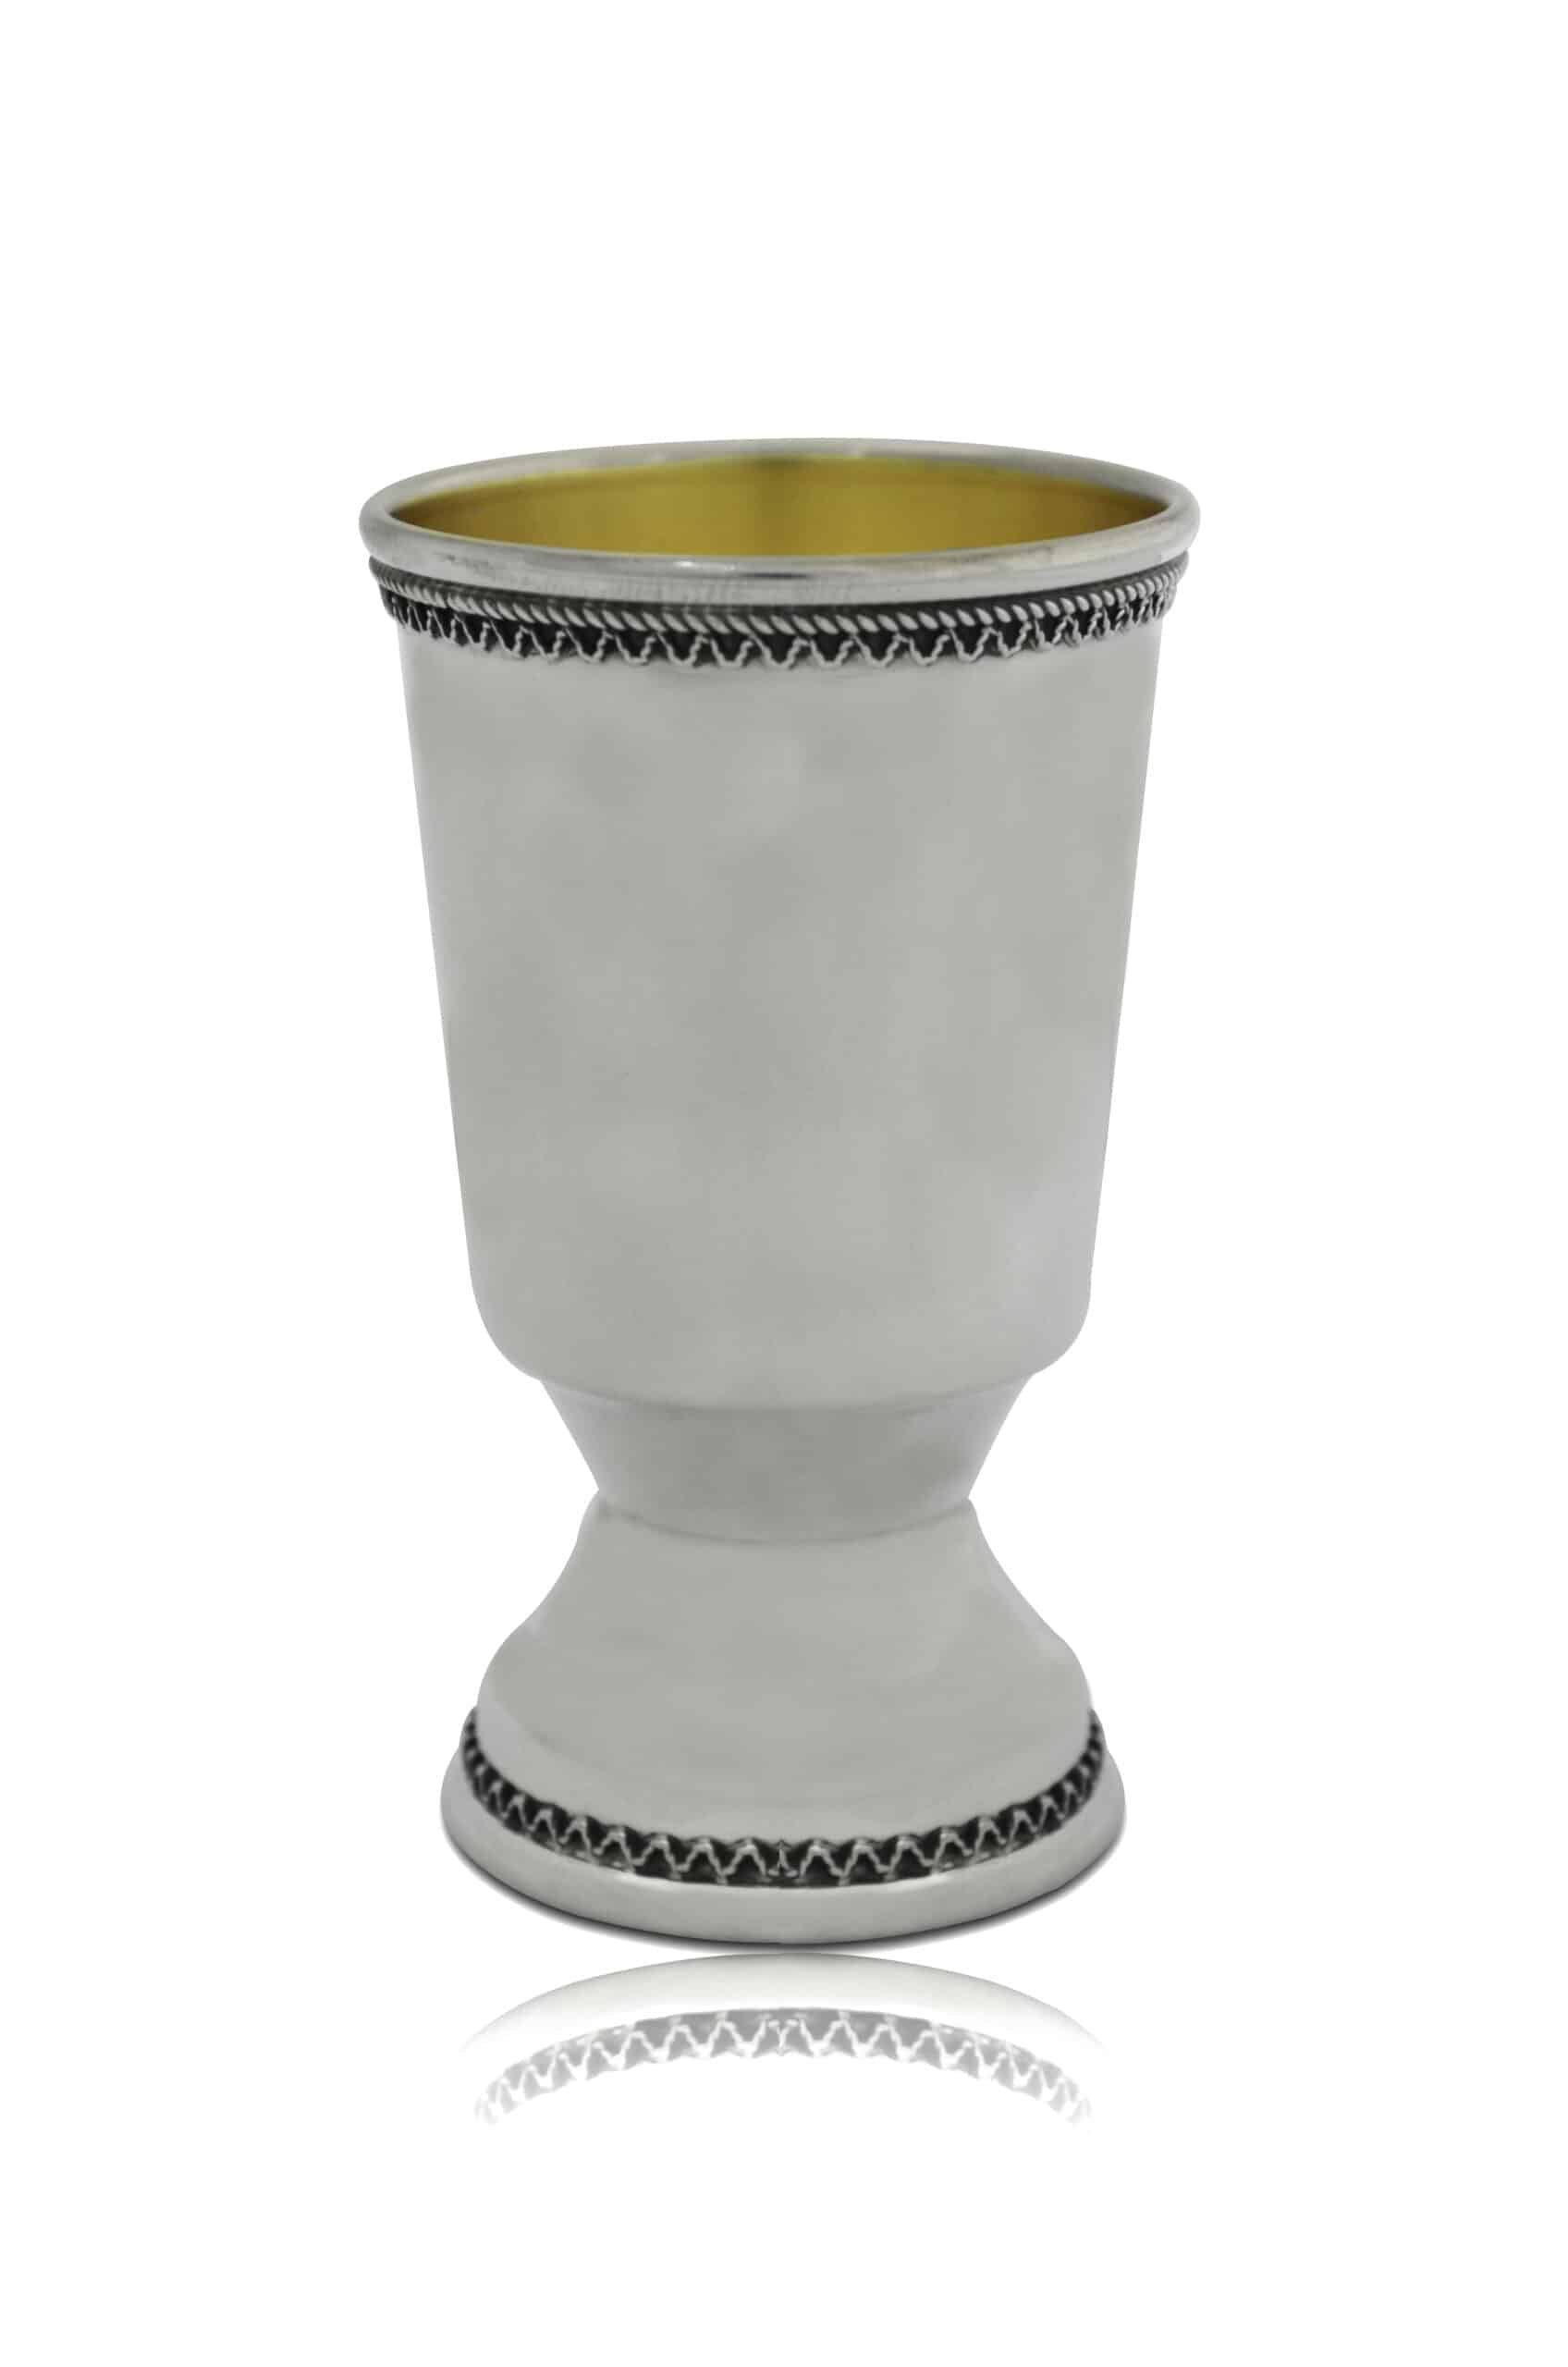 Classic Small Kiddush Cup “Yeled Tov” Made with Filigree Rim